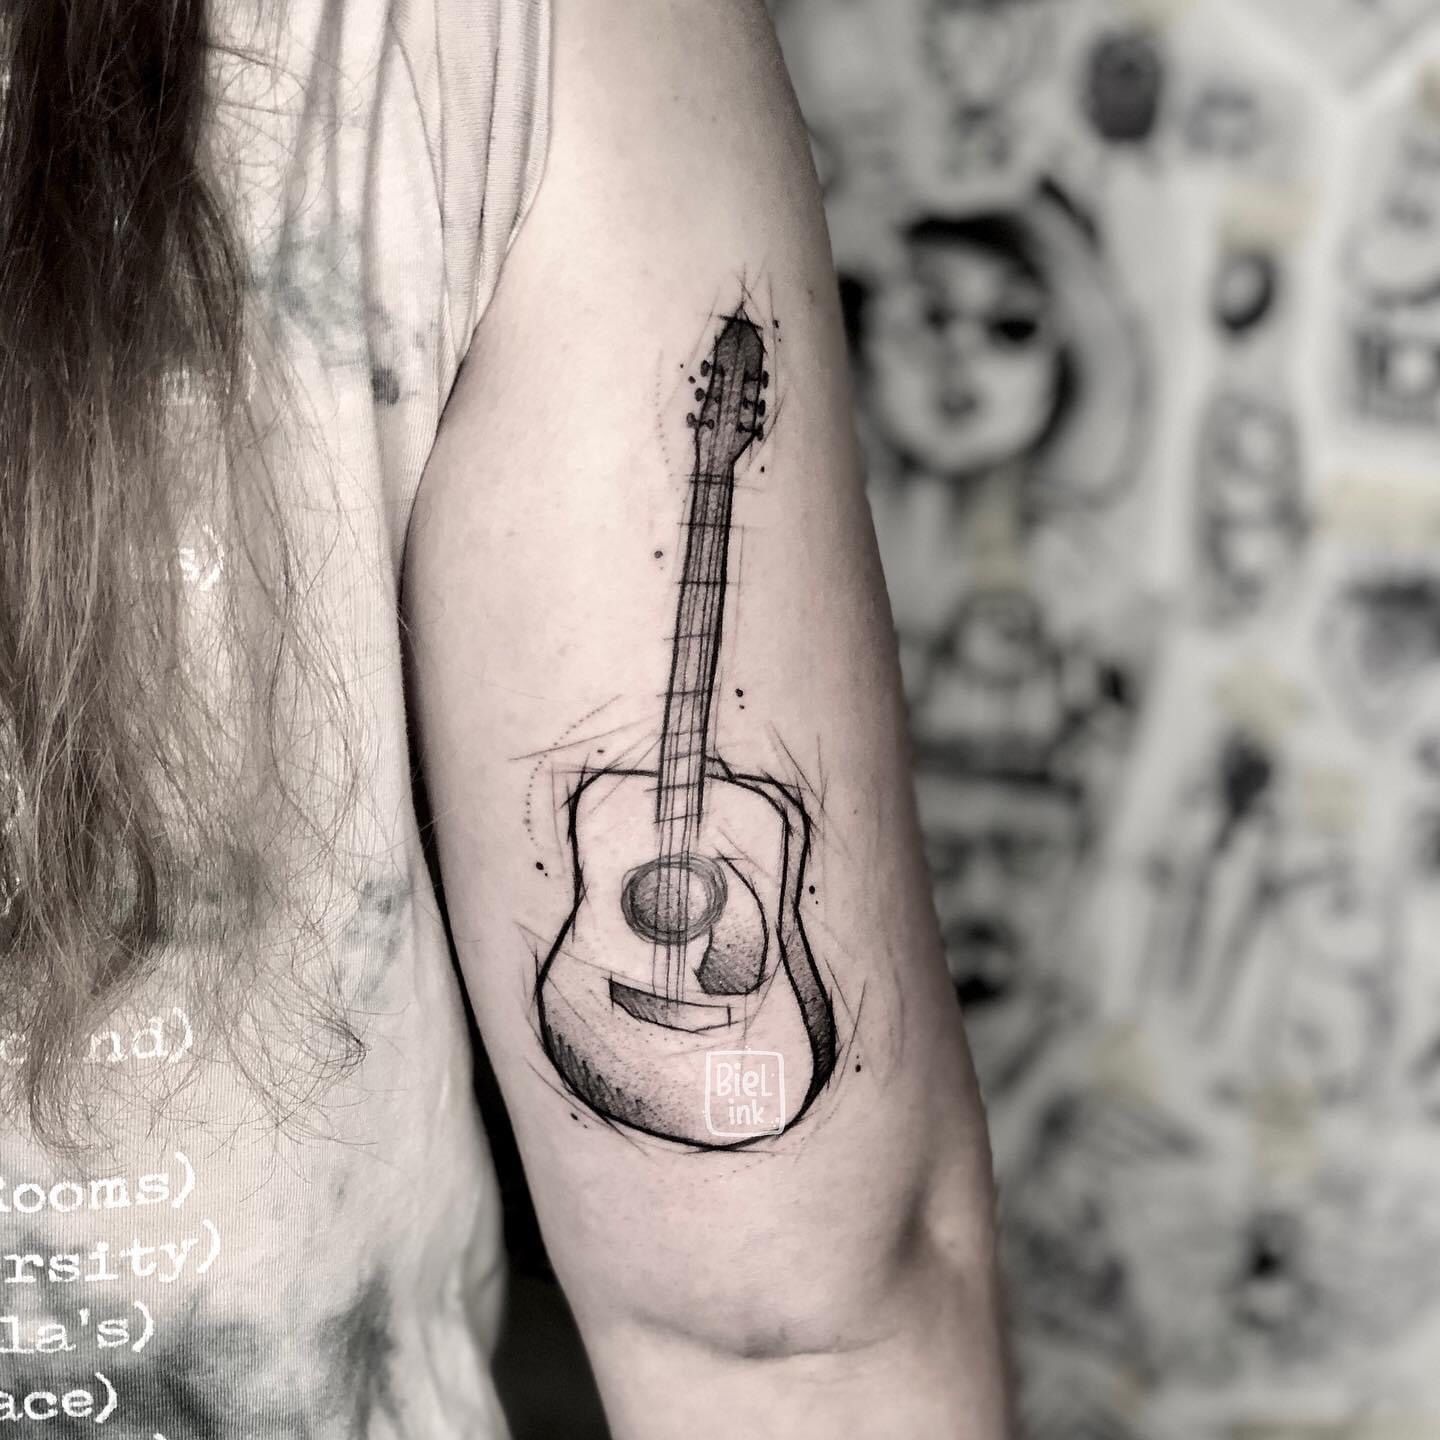 A man with a tattoo on his arm holding a guitar photo – Free Oldschool  Image on Unsplash